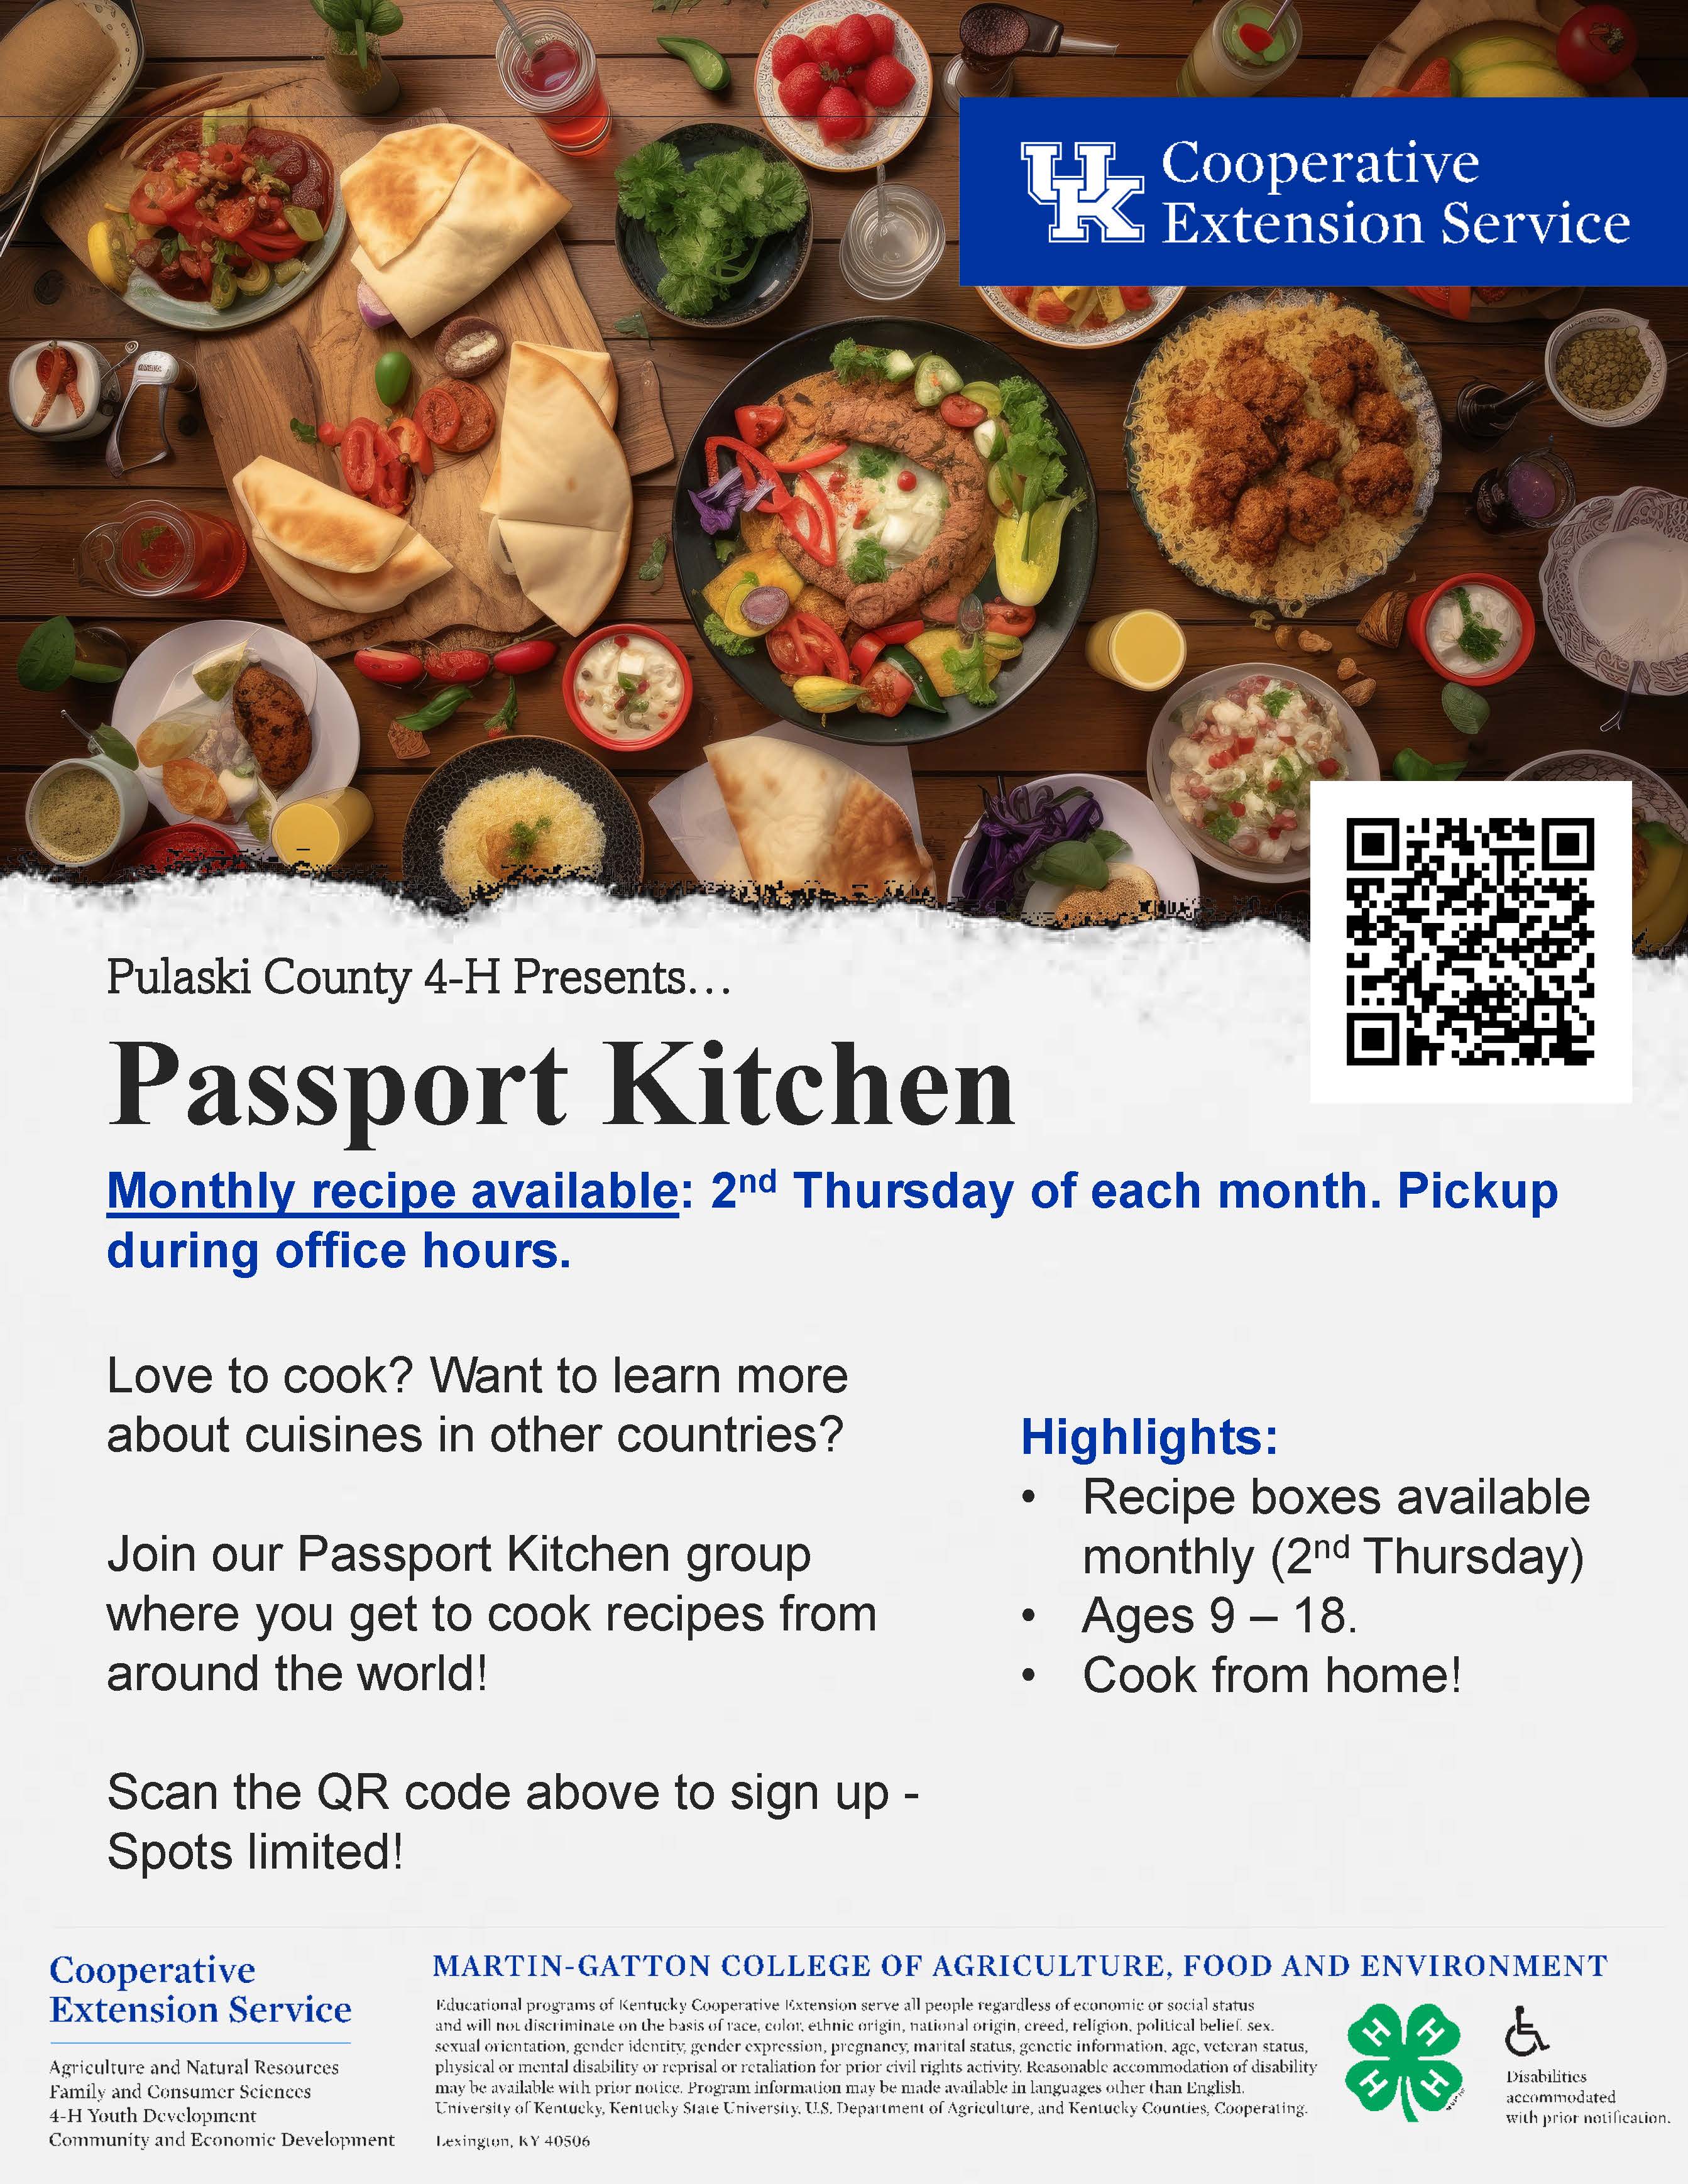 Flyer for Passport Kitchen with images of various foods and details about the program.